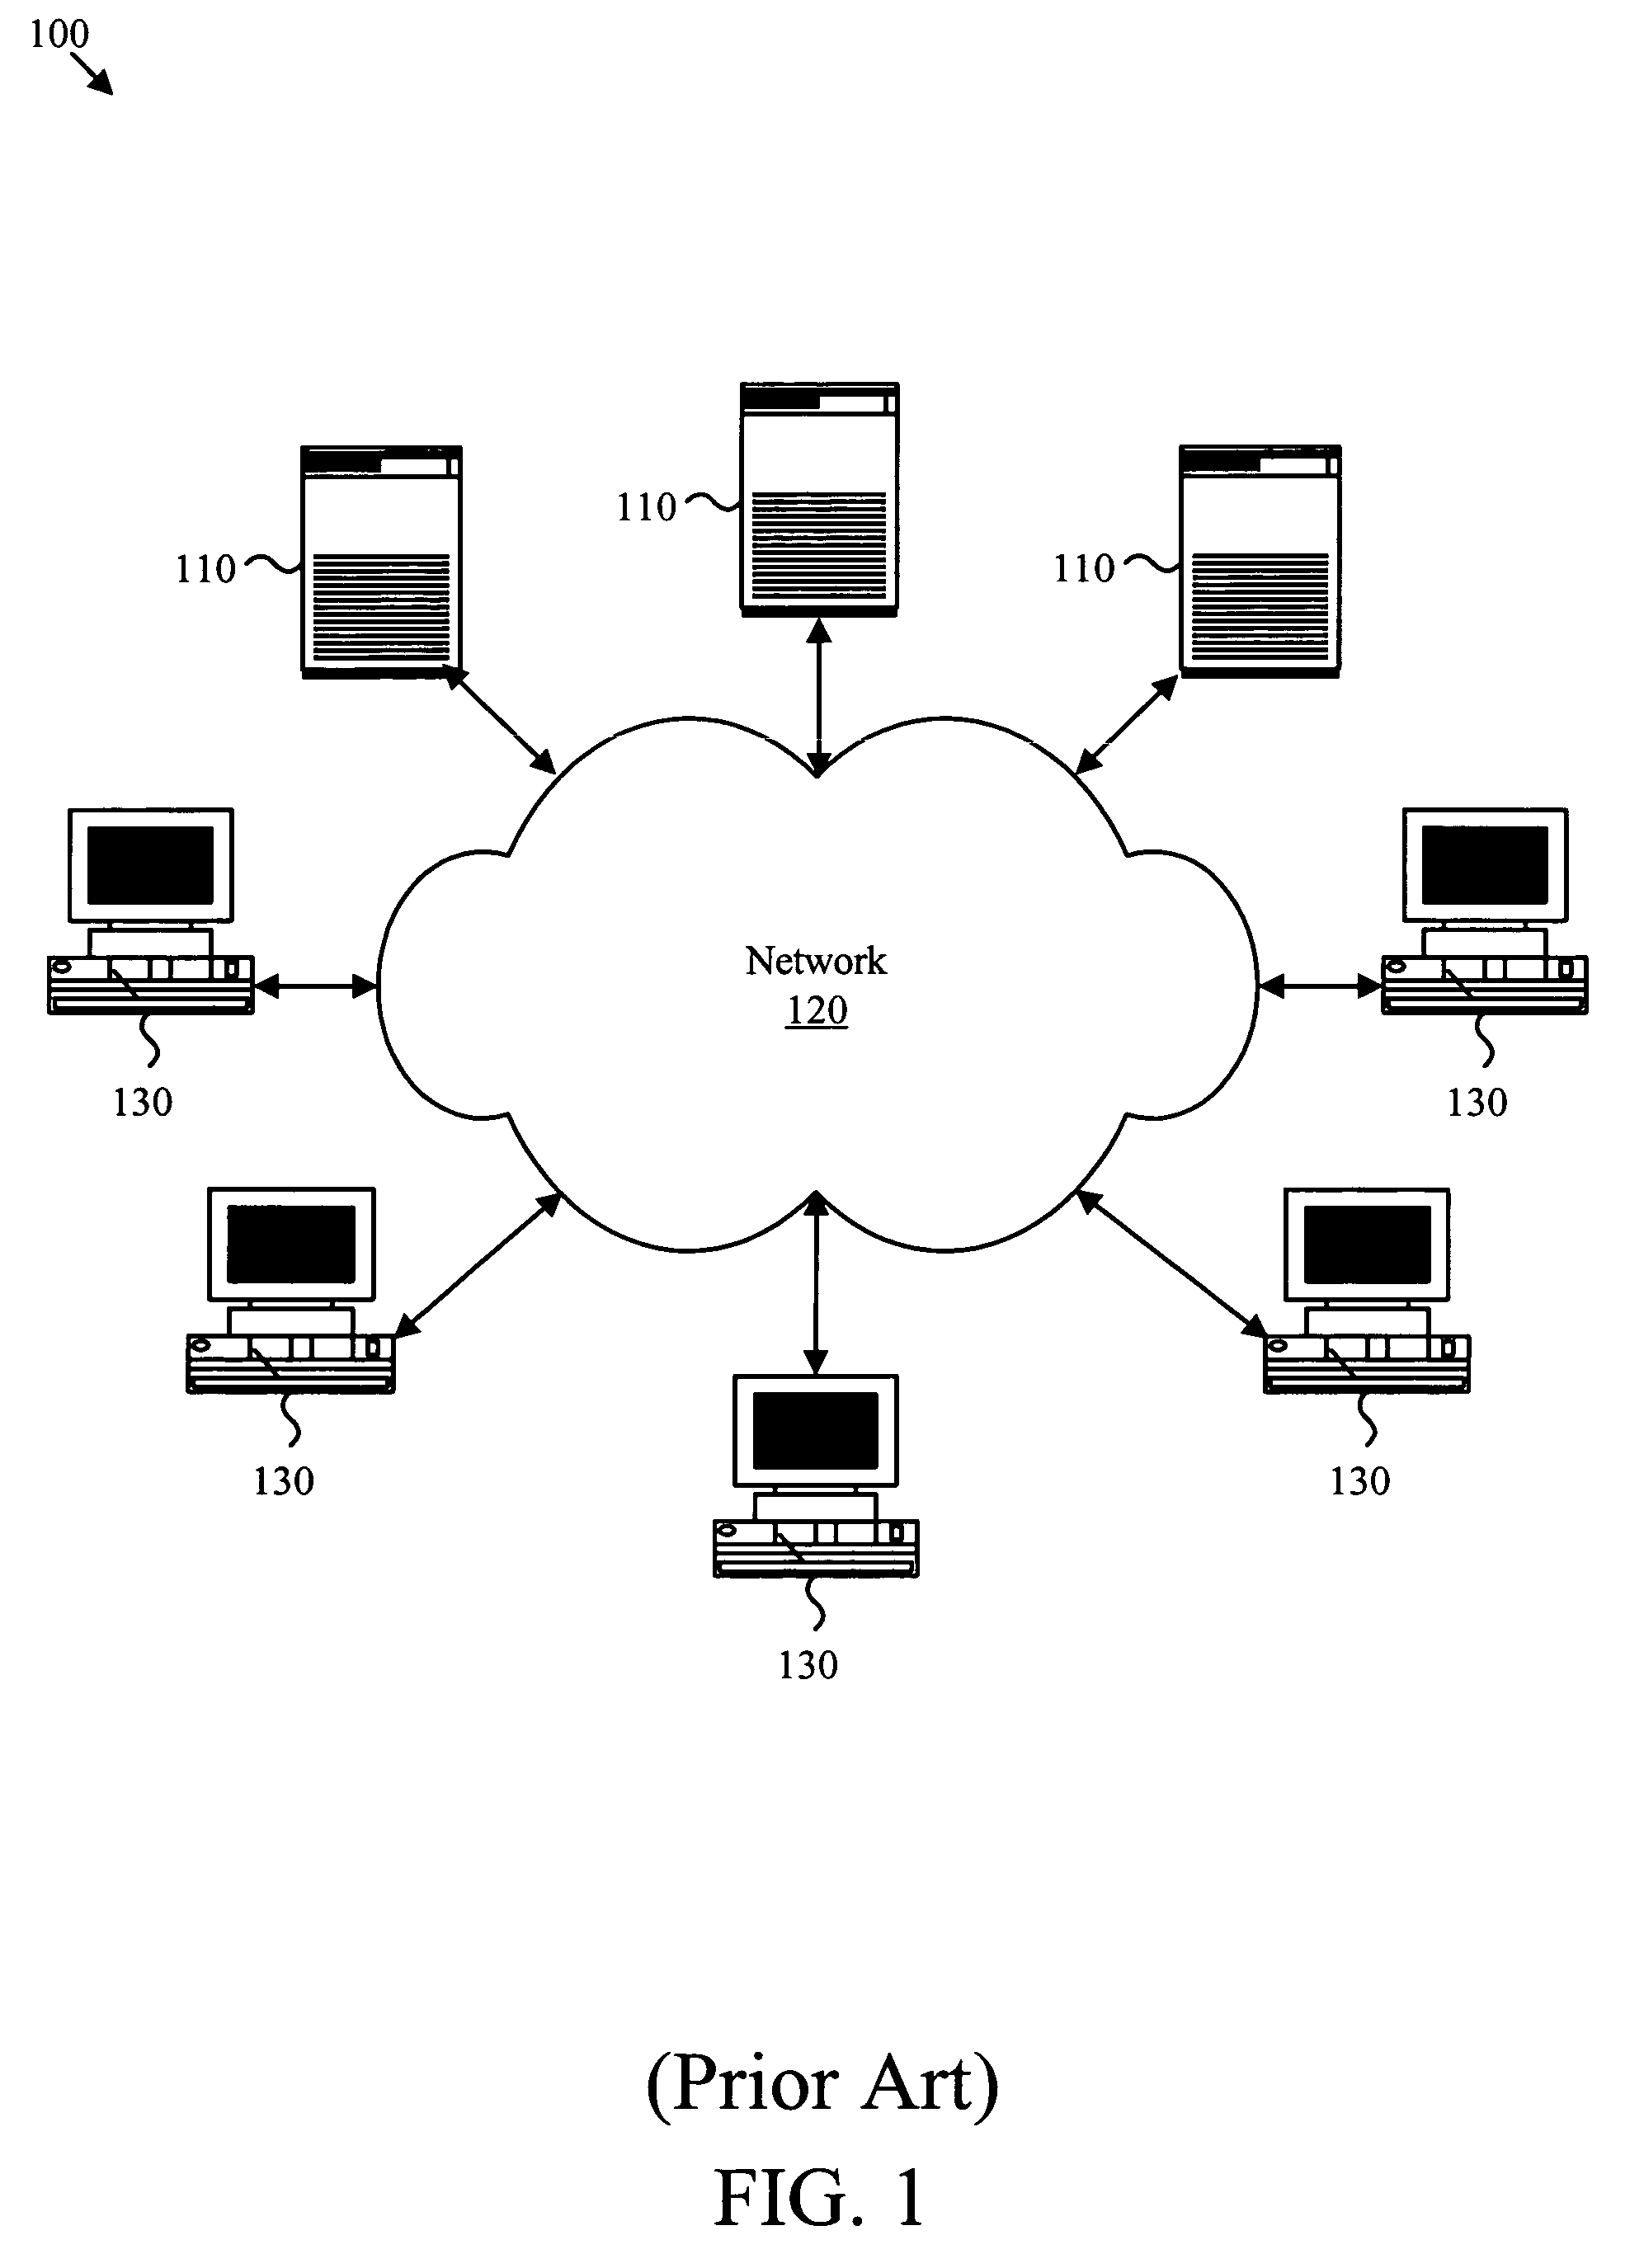 Apparatus, system, and method for managing policies on a computer having a foreign operating system